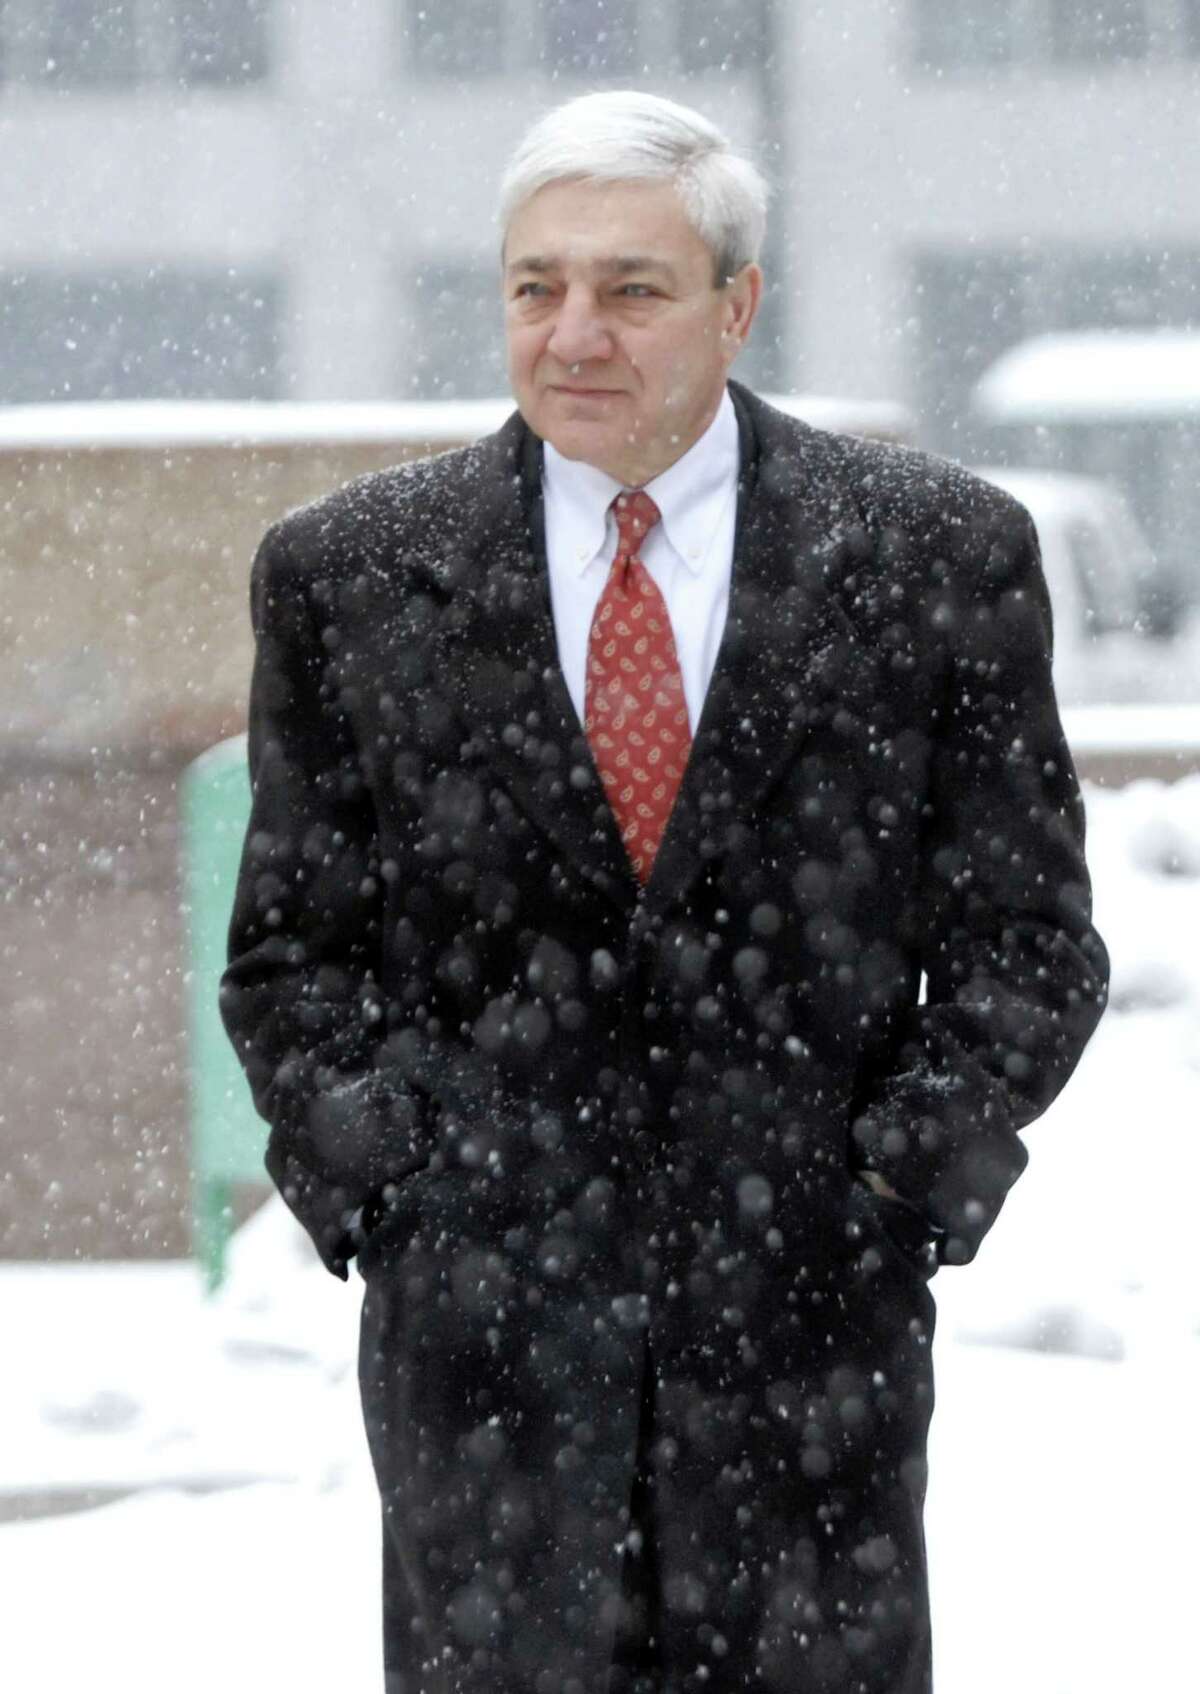 Former Penn State President Graham Spanier walks to the Dauphin County Court in a snow storm for a pretrial hearing in Harrisburg, Pa. on Tuesday, Dec. 17, 2013.